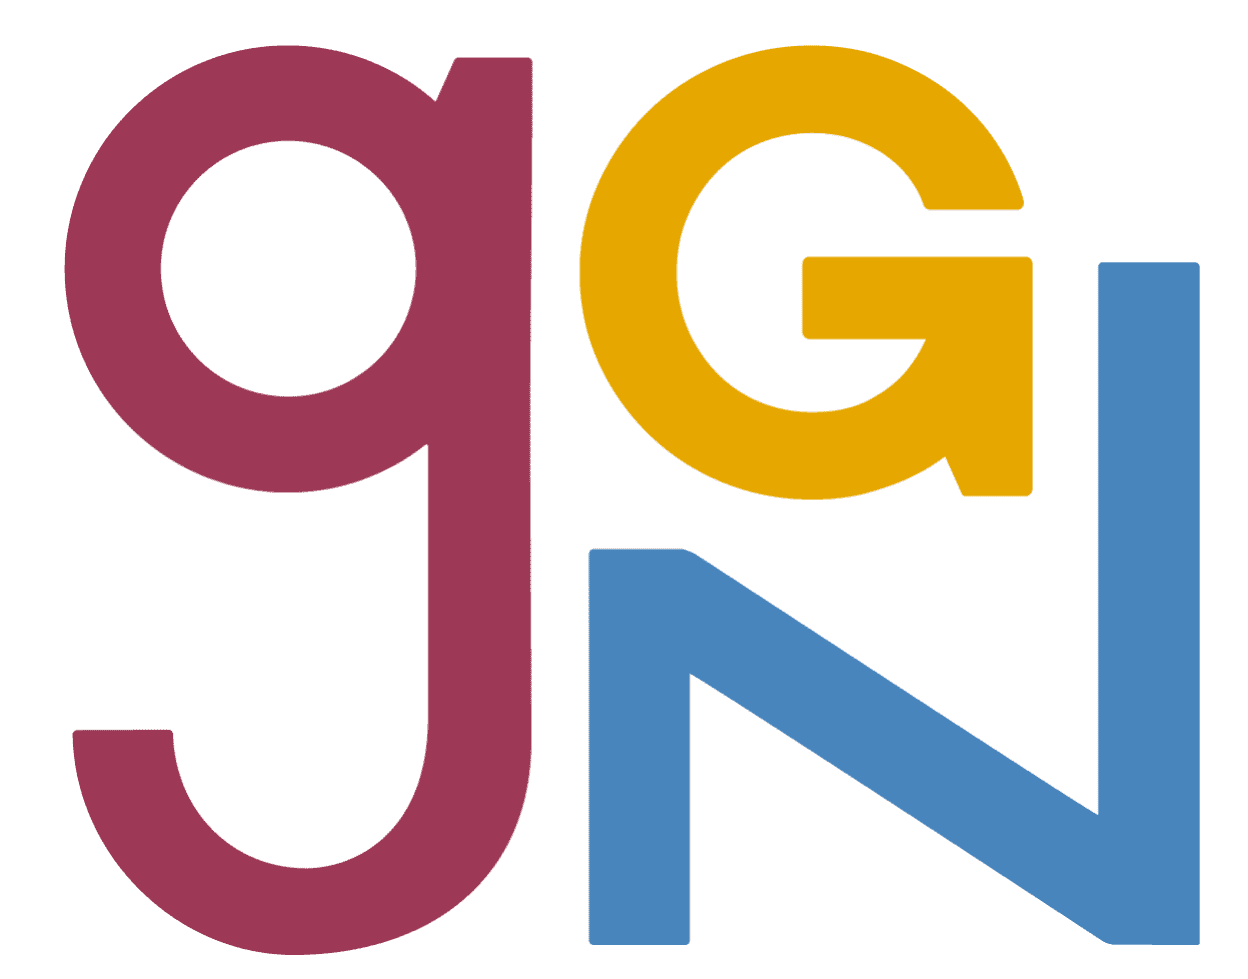 Stiftung GGN